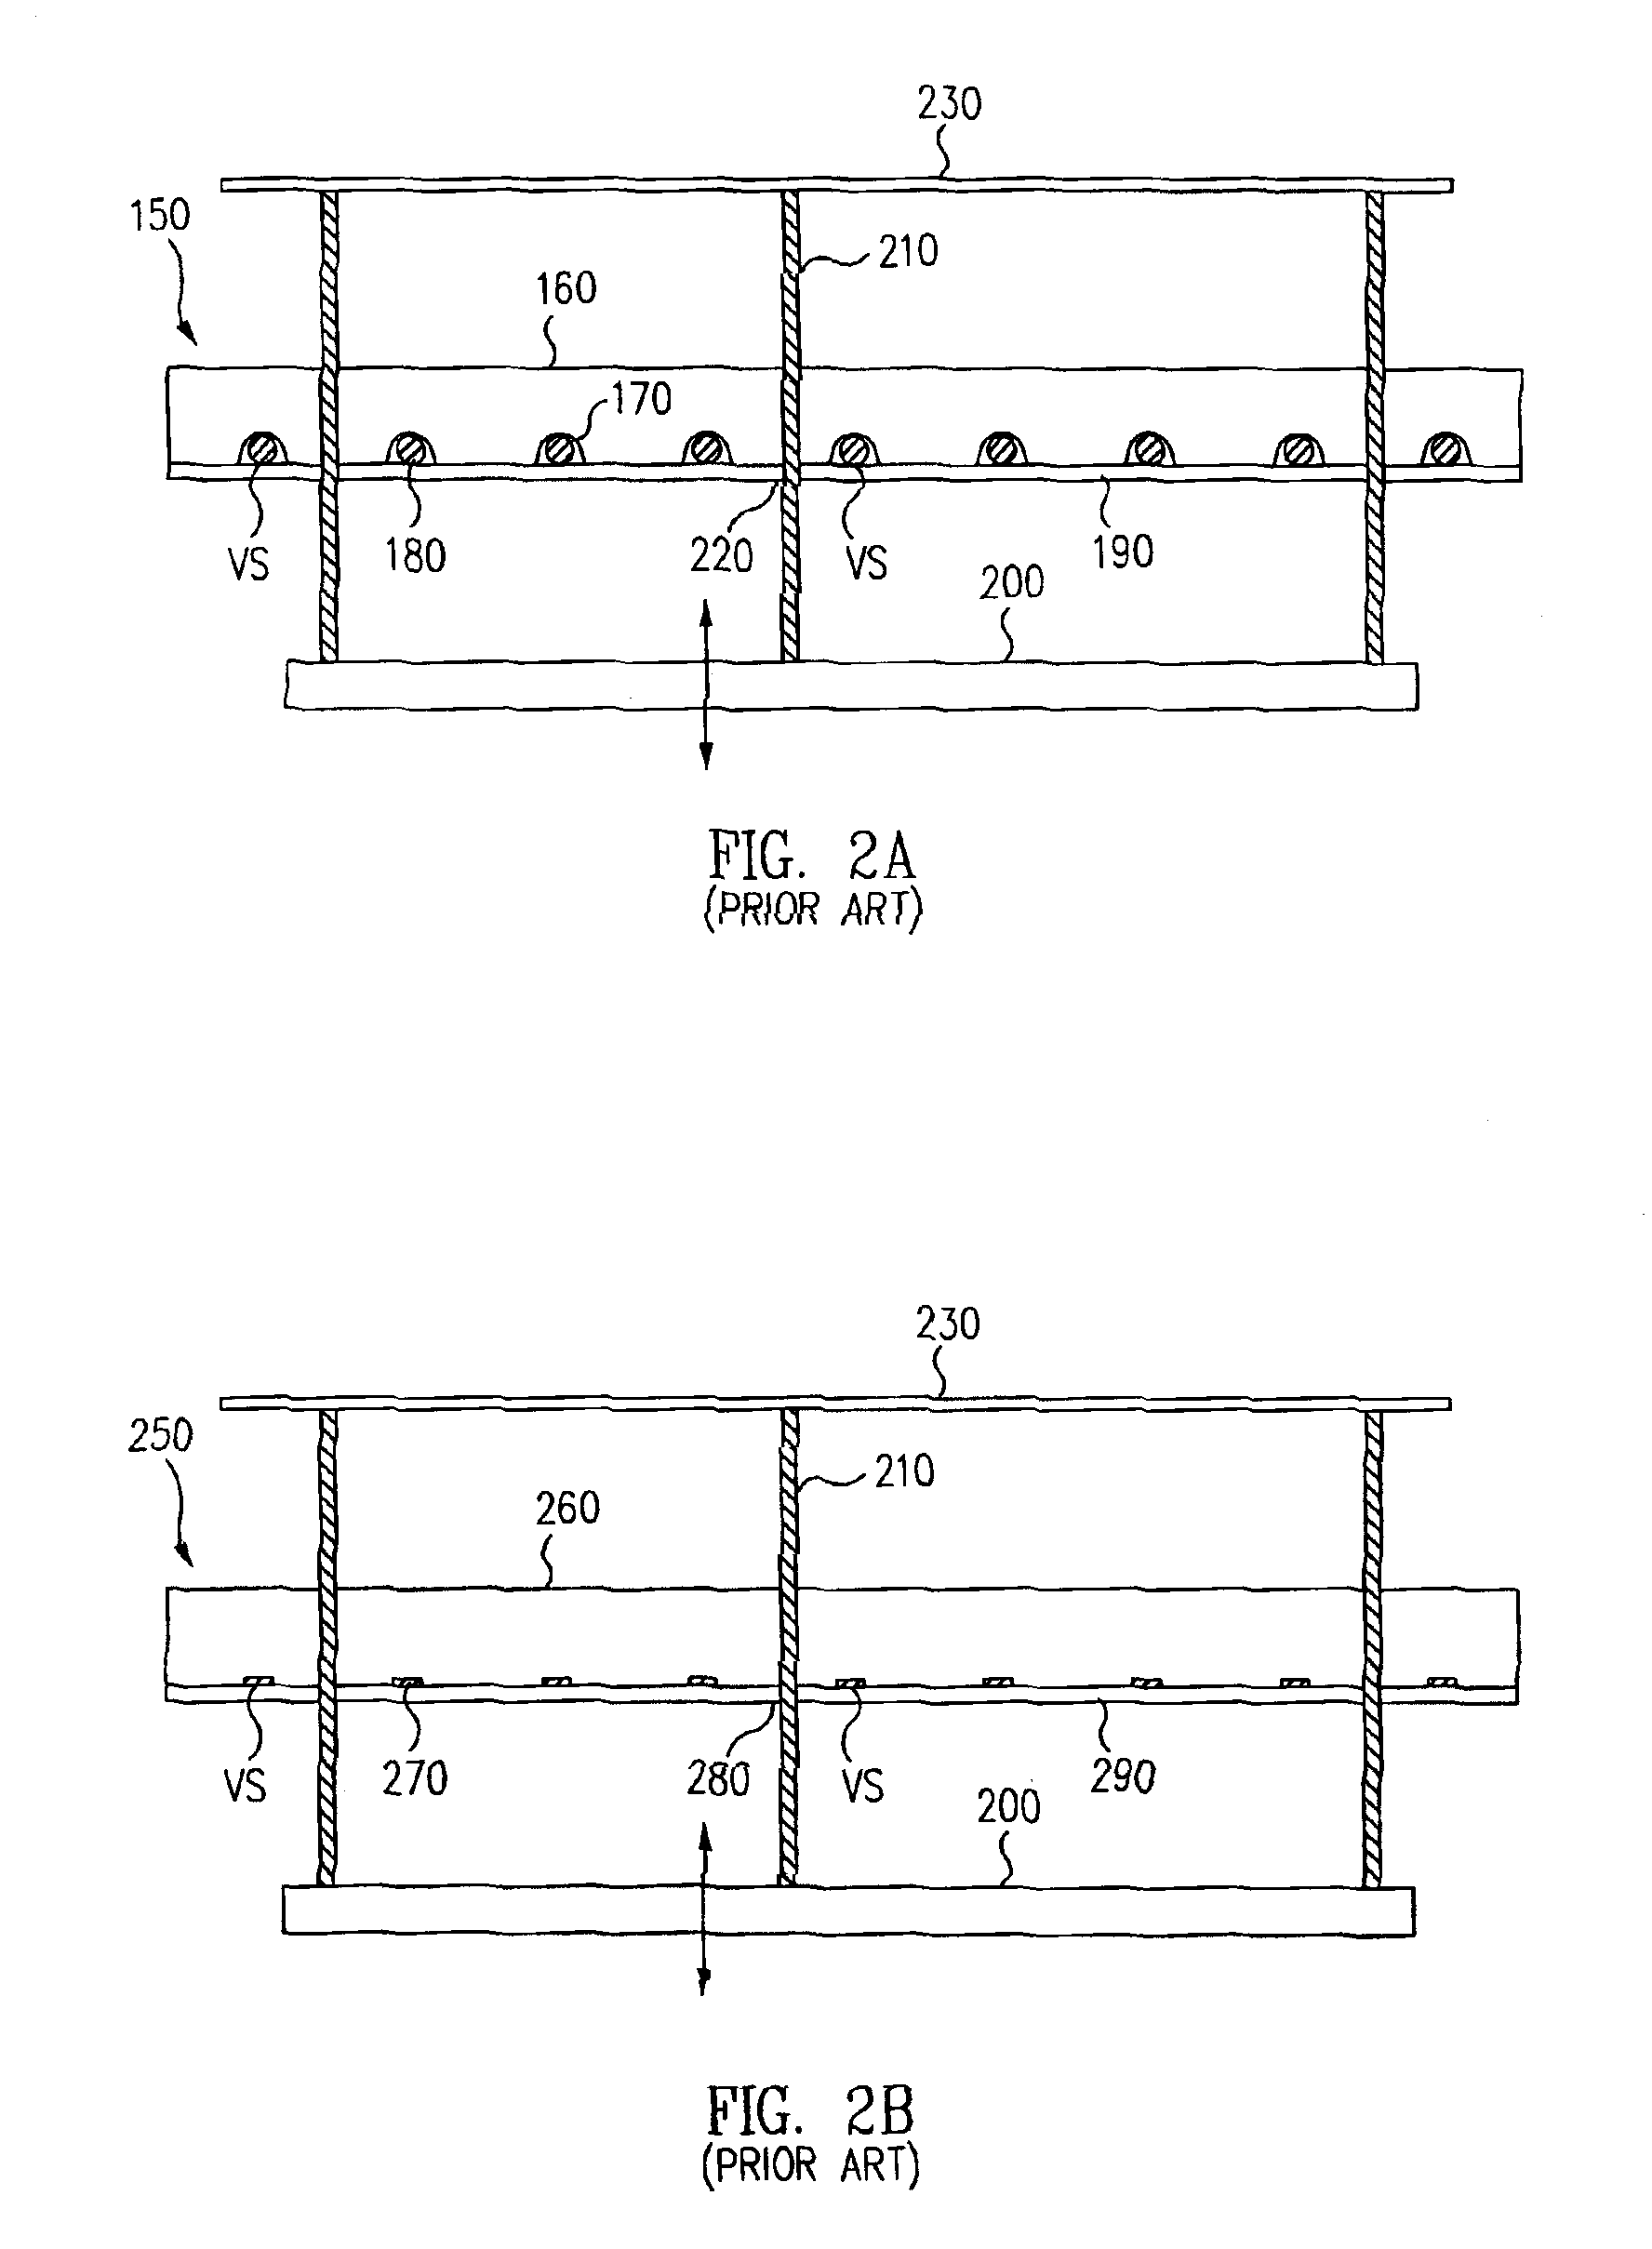 Integrally formed bake plate unit for use in wafer fabrication system